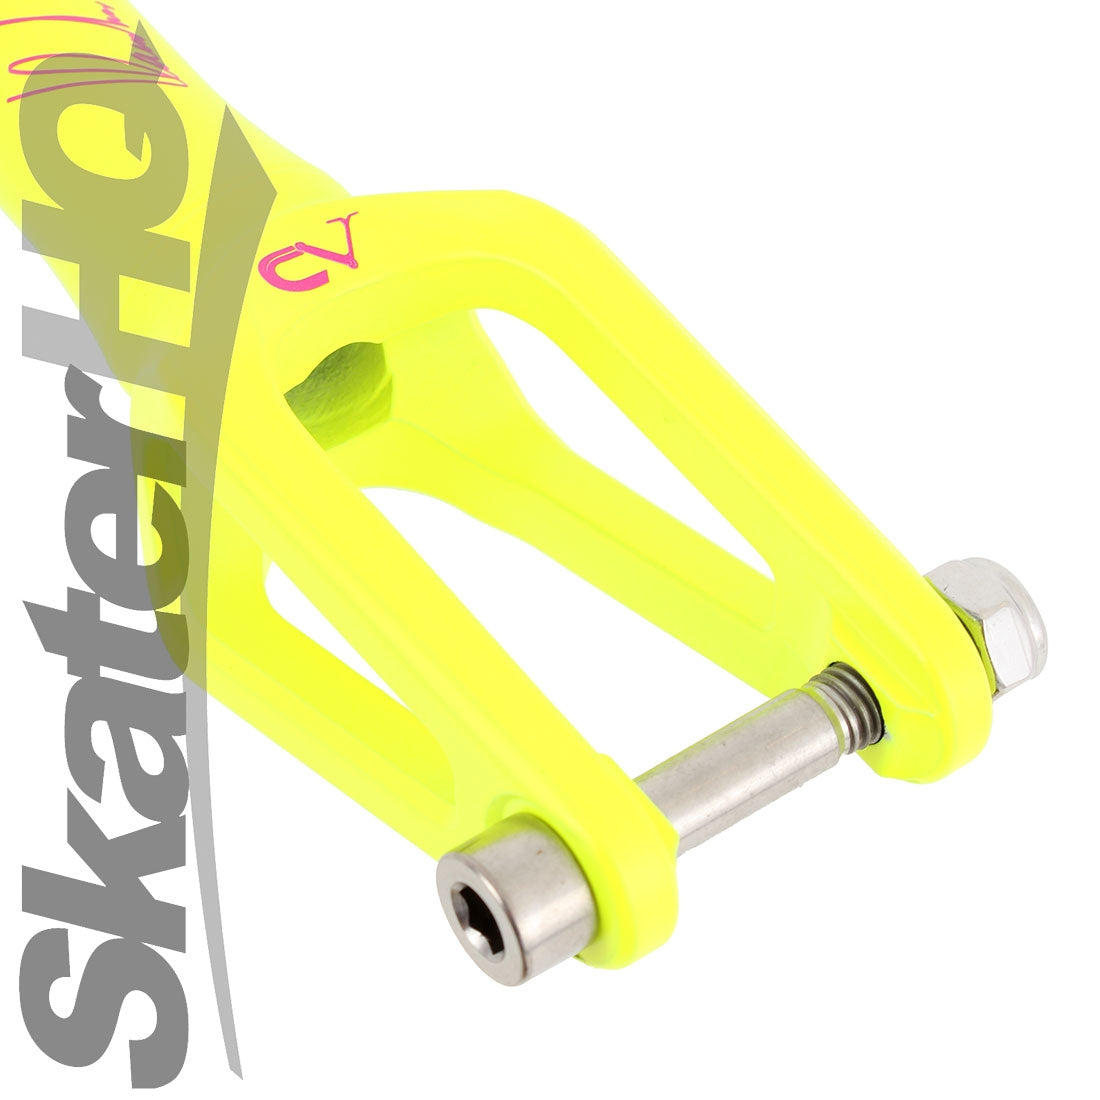 Sacrifice CV IHC Fork - Neon Yellow Scooter Forks